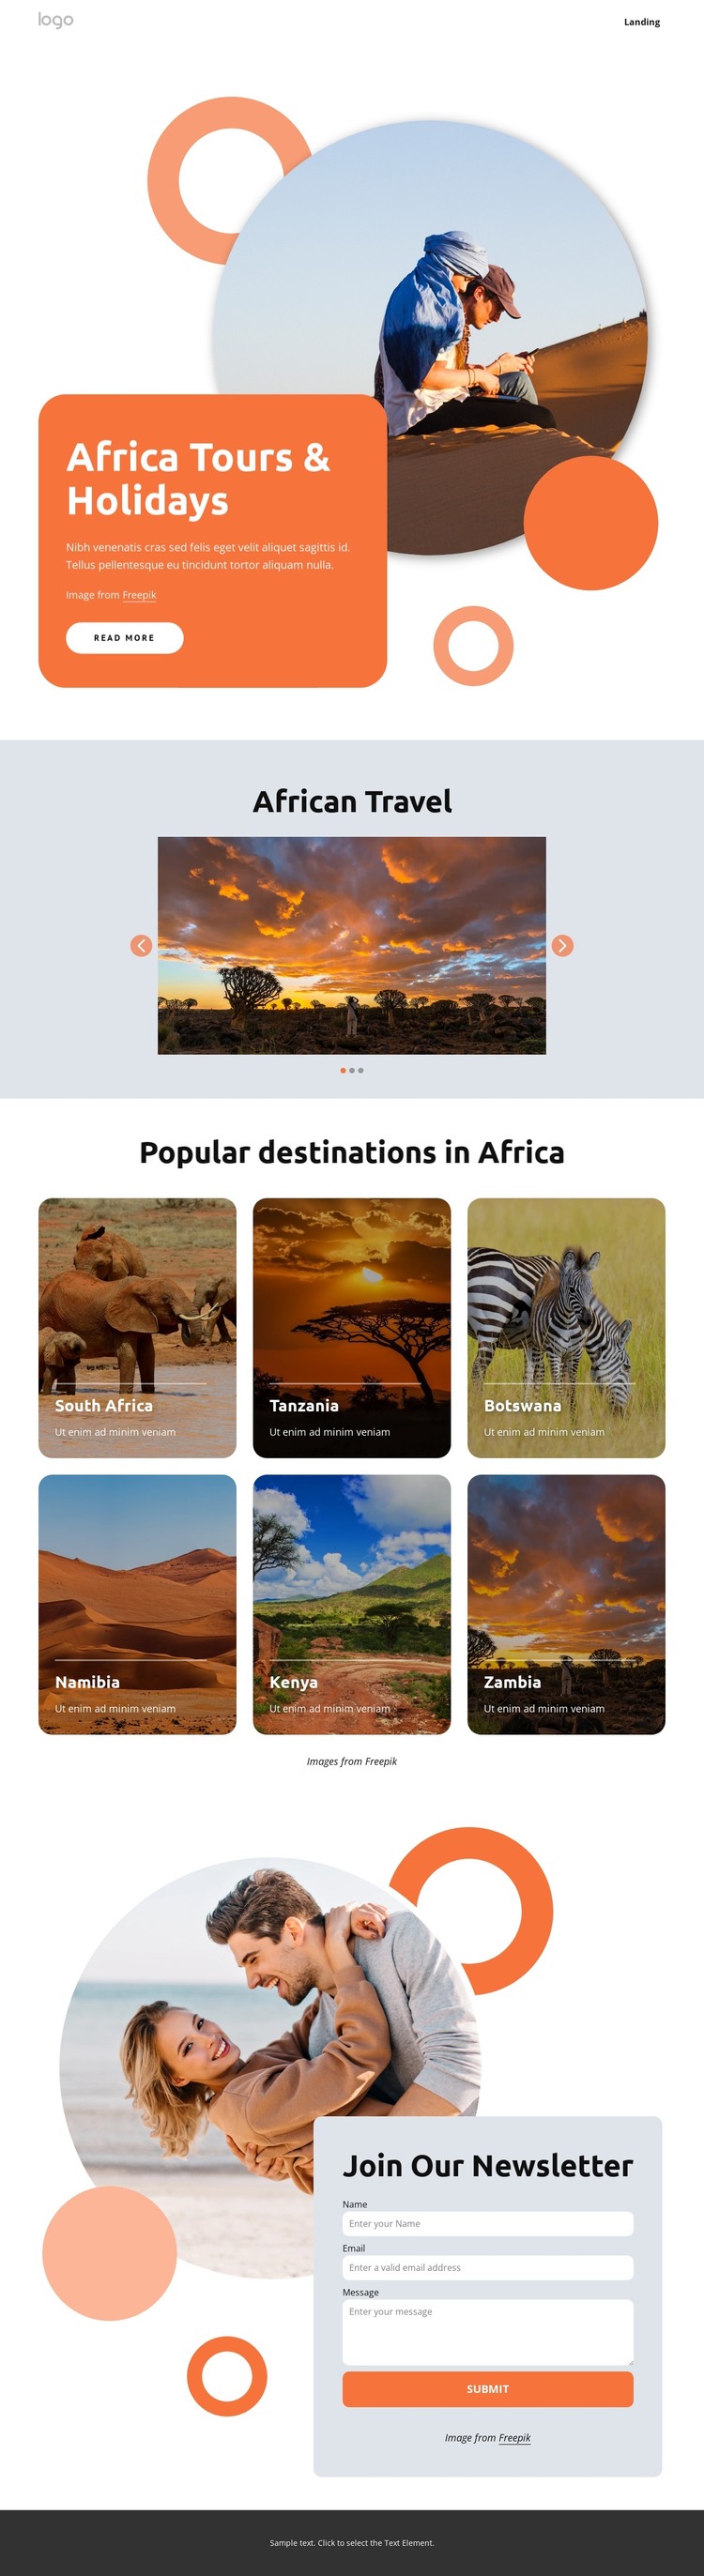 Hand-crafted African holidays Web Design